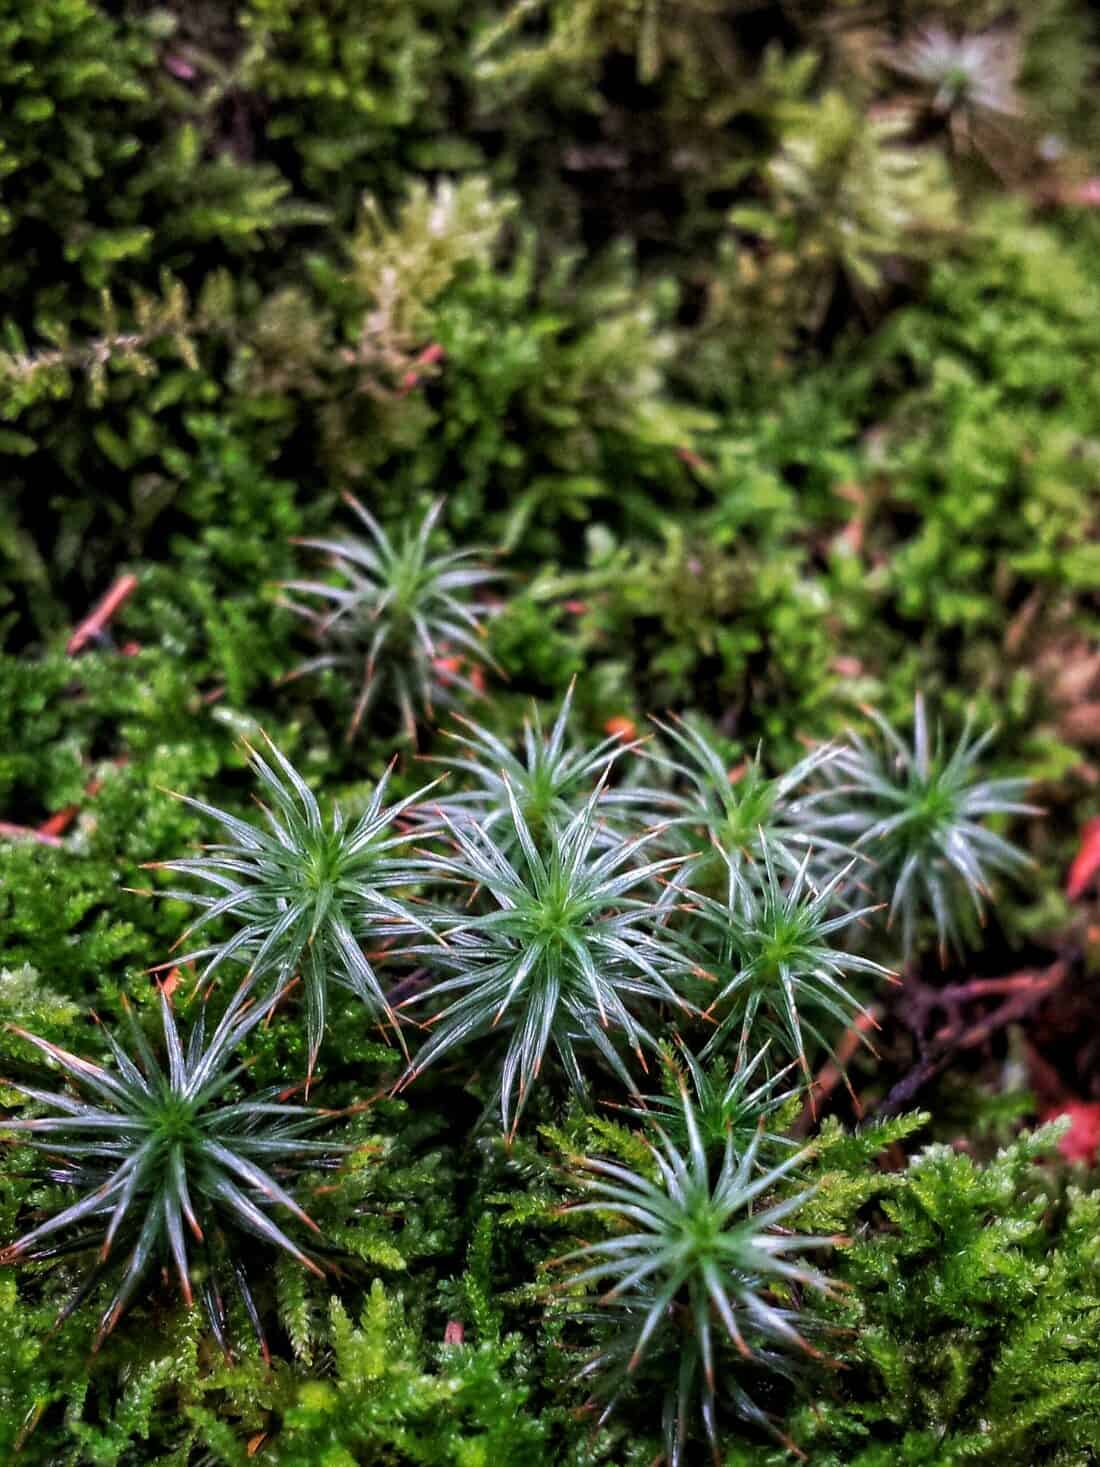 Small star moss plants growing on the ground.